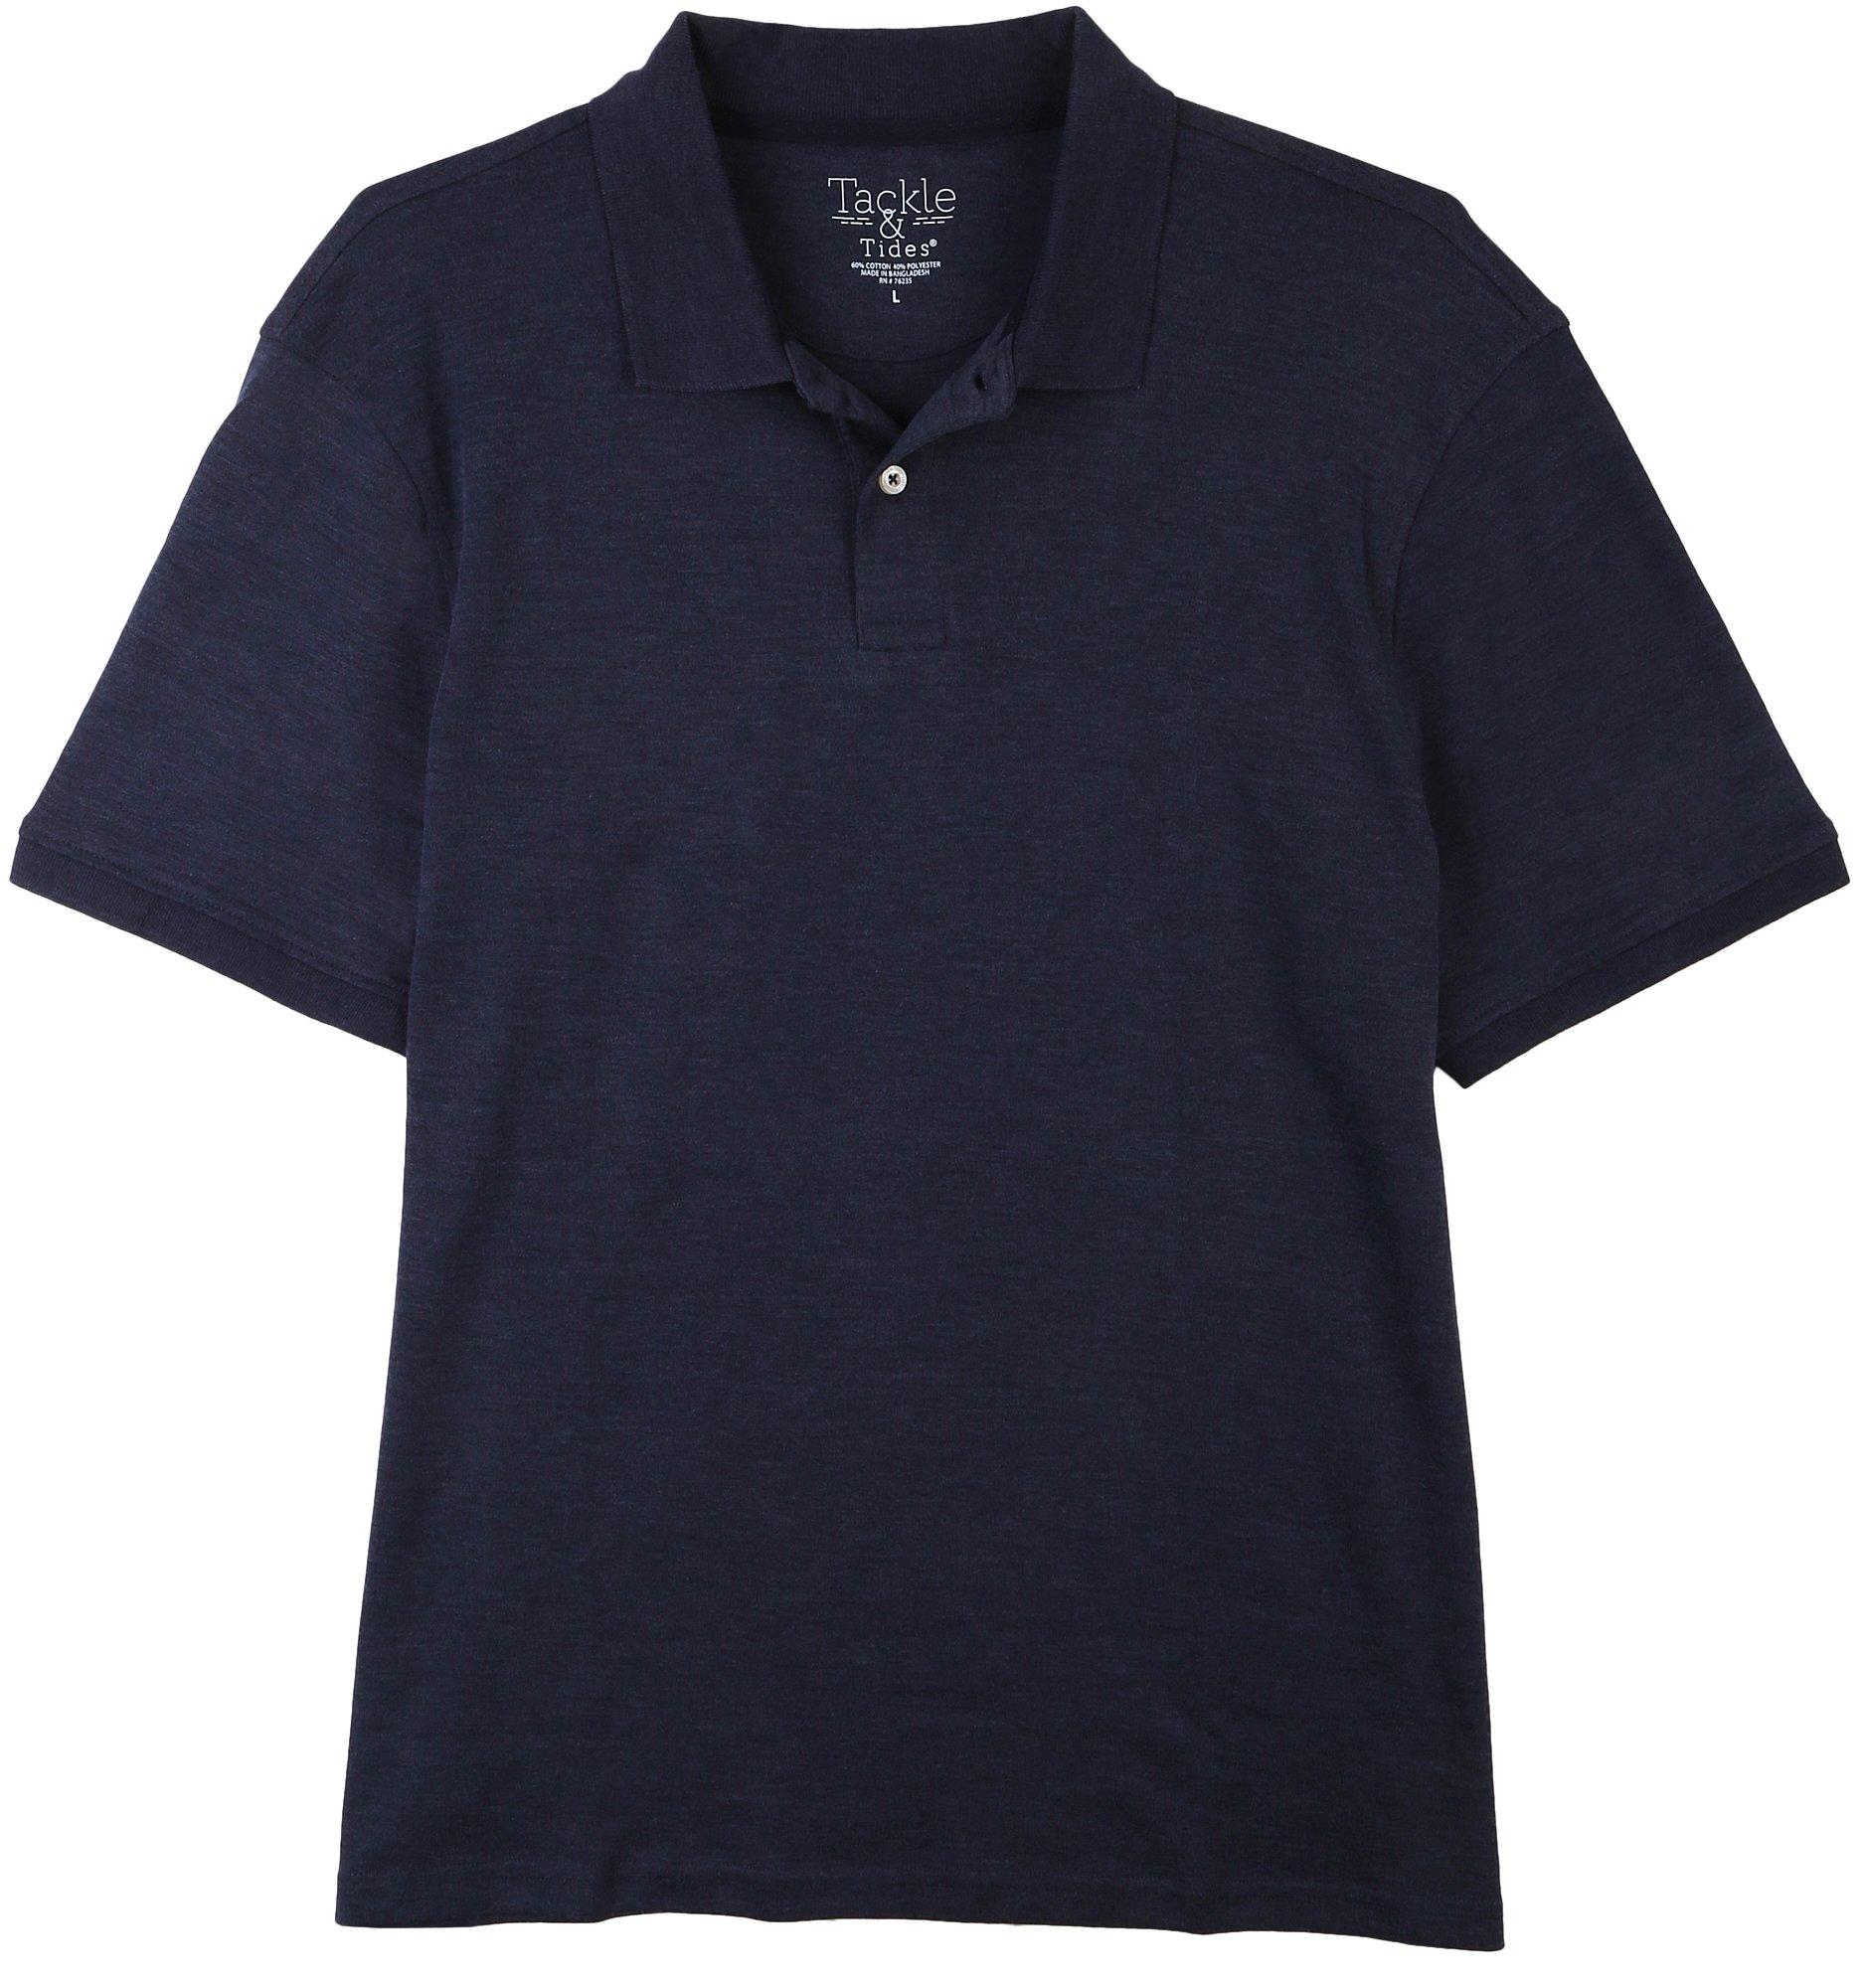 Tackle & Tides Mens Heathered Short Sleeve Polo Top